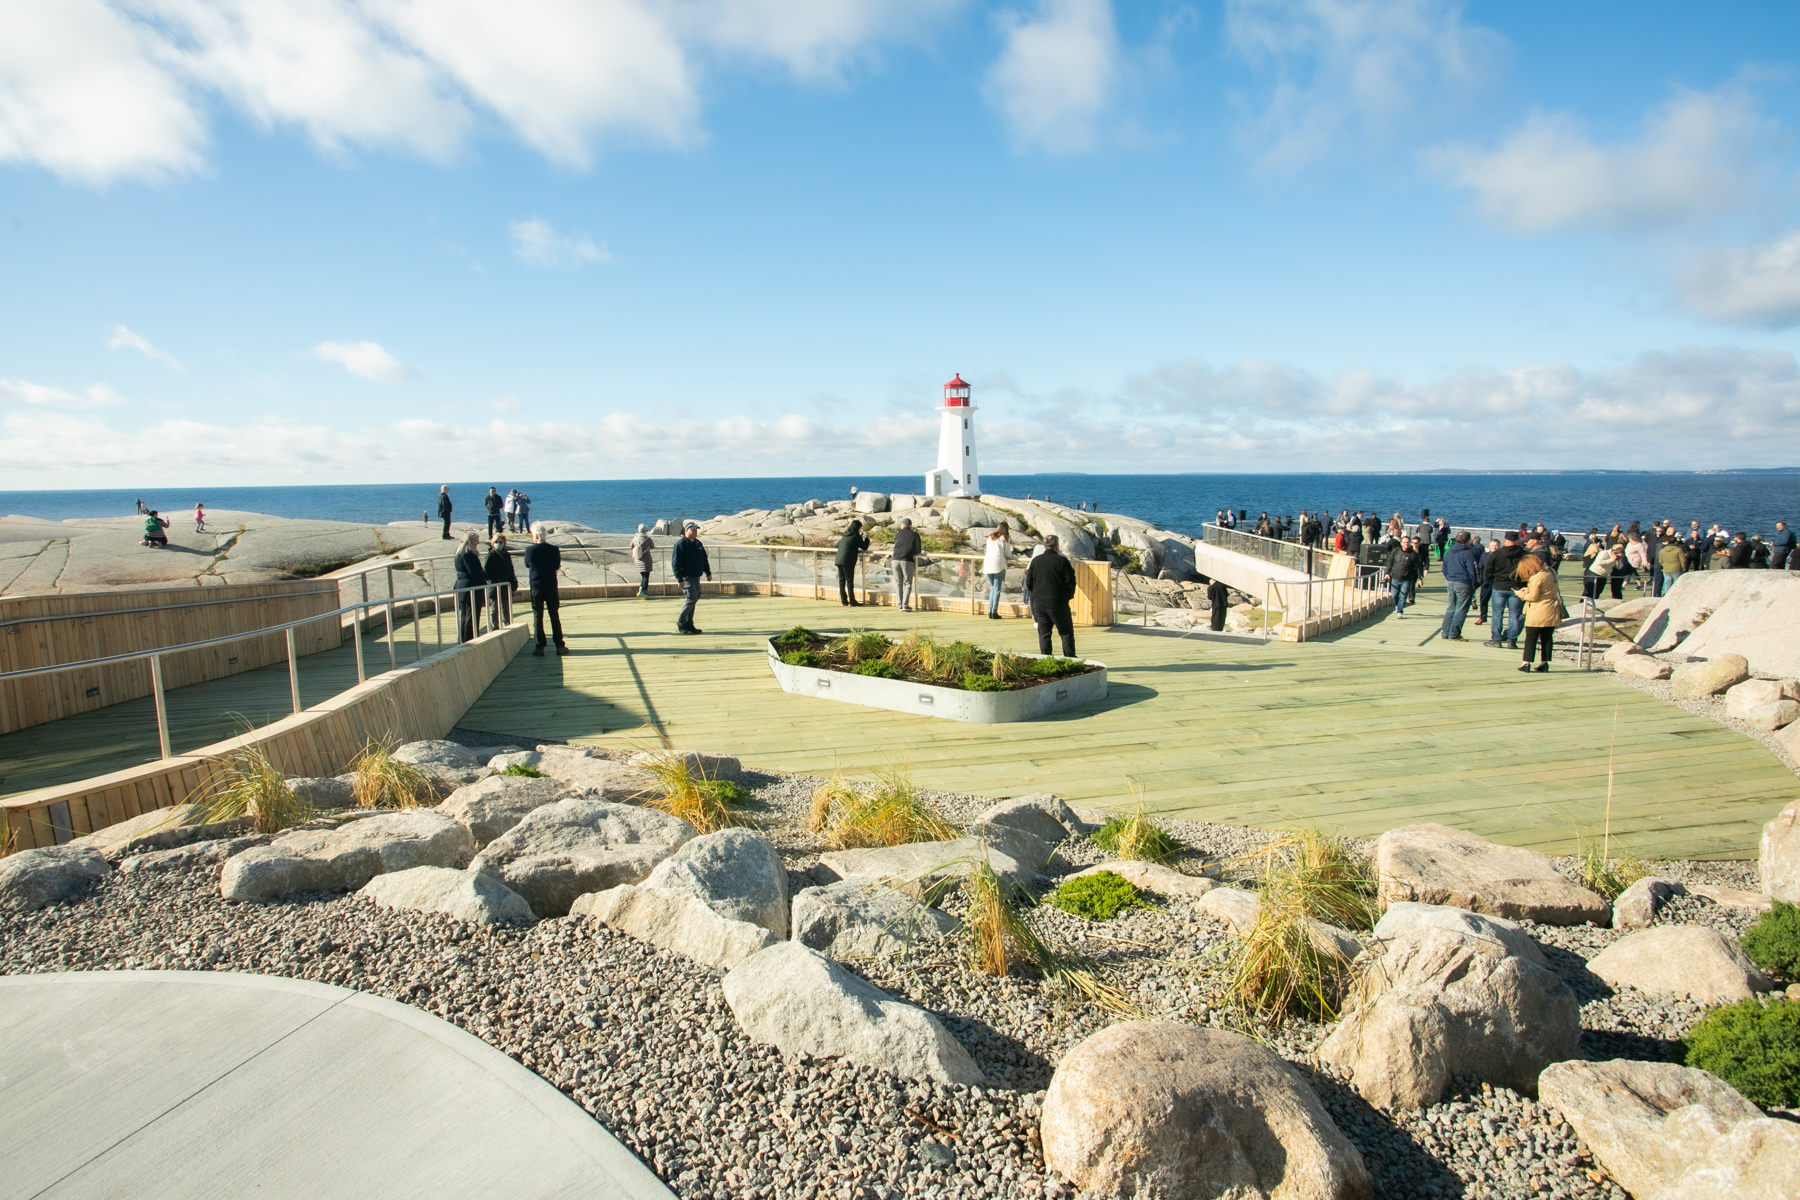 The new accessible viewing deck at Peggy's Cove.